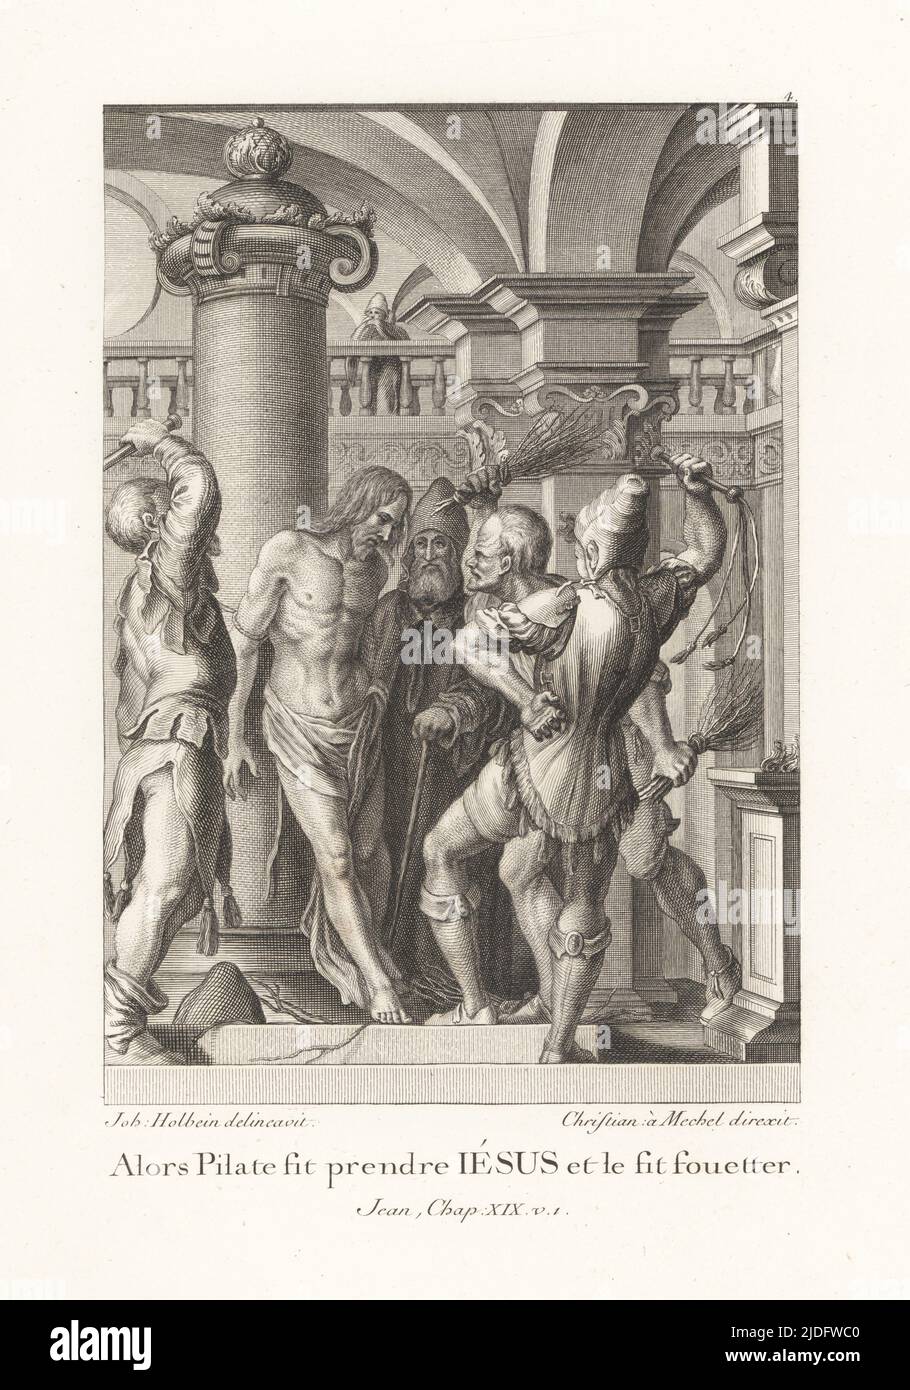 Pilate orders Jesus Christ to be flogged by several guards with cat-o-nine tails and birches. Alors Pilate fit prendre Jesus et le fit fouetter. John XIX v. 1. Le Passion de Notre Seigneur, The Passion of our Lord. Copperplate engraving by Christian Mechel after a portrait by Hans Holbein in Christian von Mechel's Oeuvre de Jean Holbein, Chez Guillaume Haas, Basel, 1790. Stock Photo